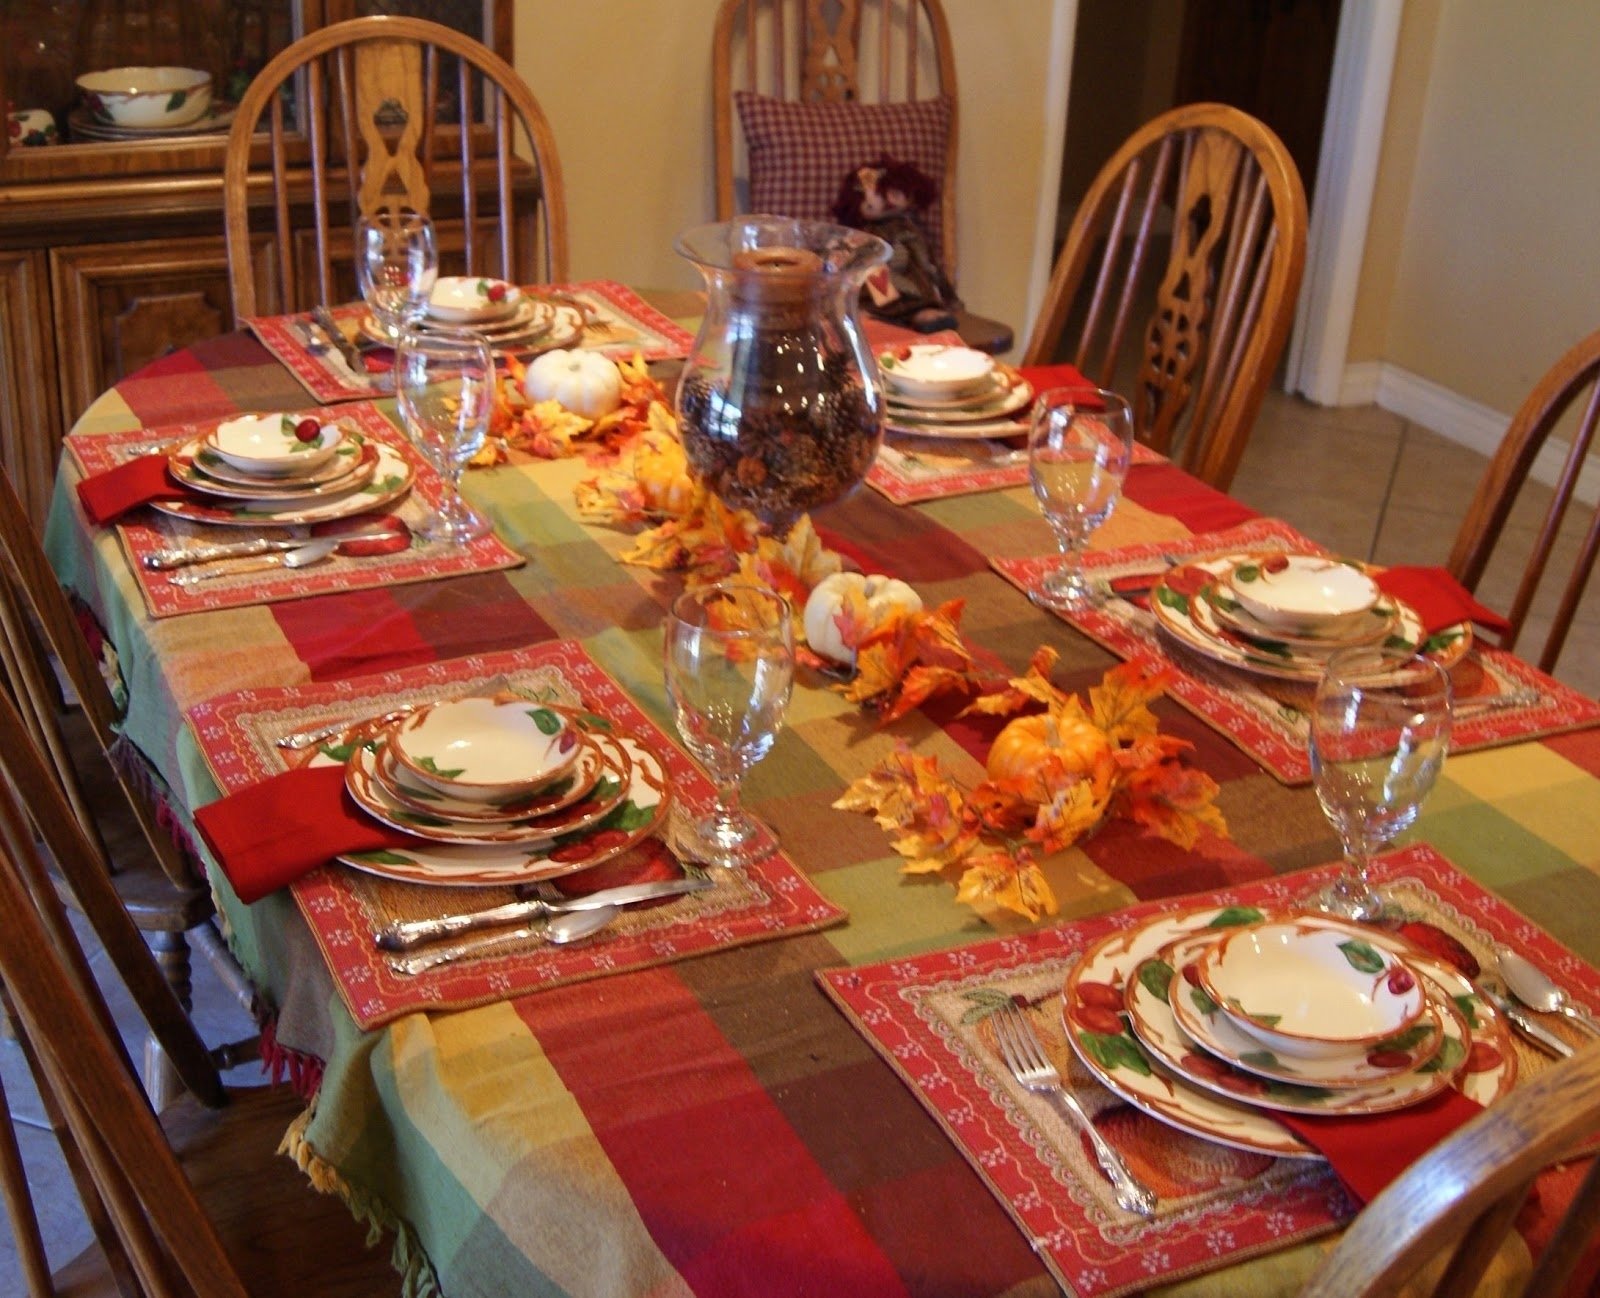 10 Spectacular Ideas For Thanksgiving Table Decorations free round table decorations for thanksgiving dinner x extraordinary 2022